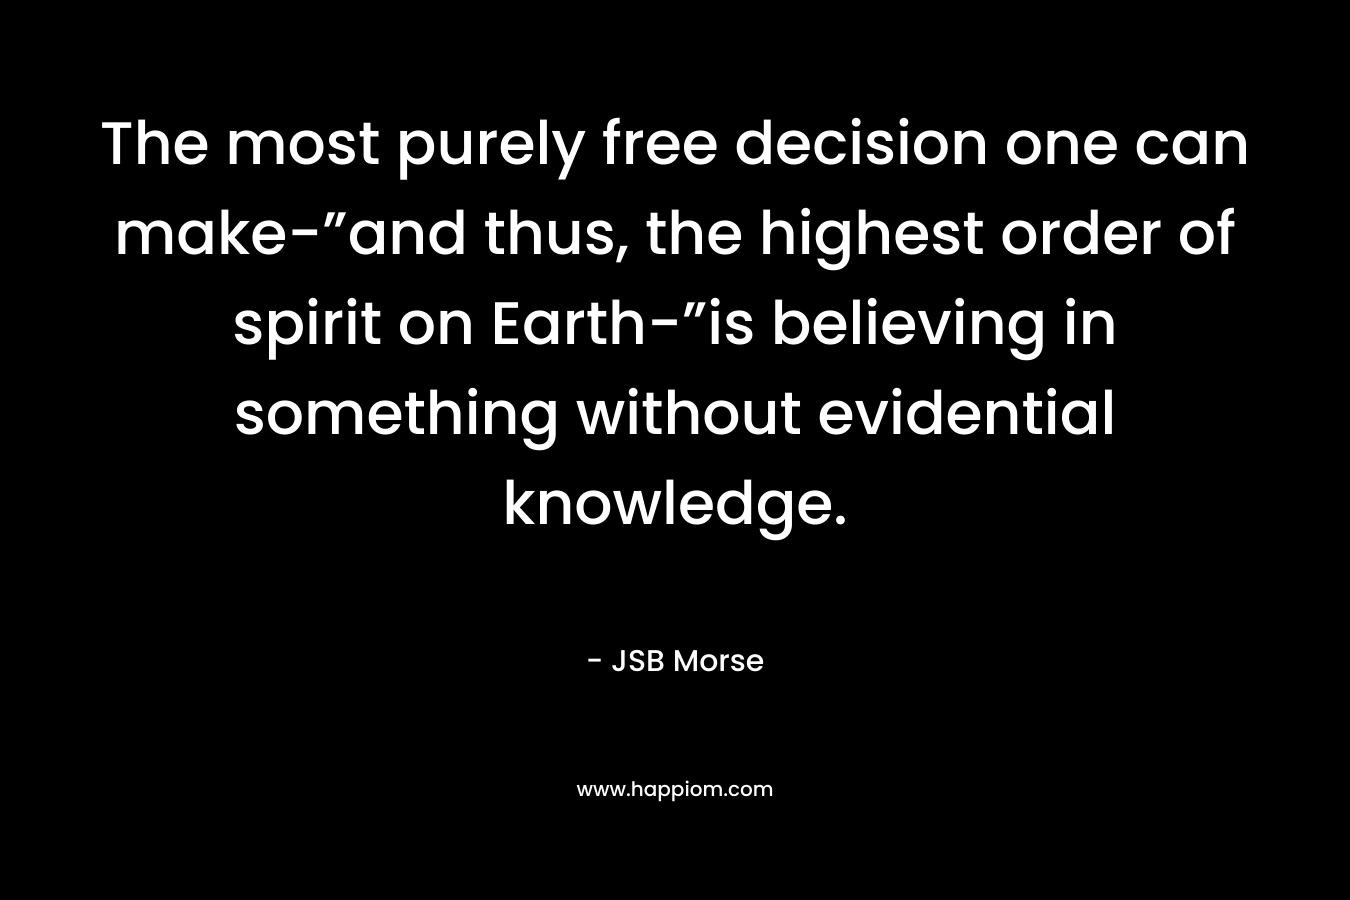 The most purely free decision one can make-”and thus, the highest order of spirit on Earth-”is believing in something without evidential knowledge.